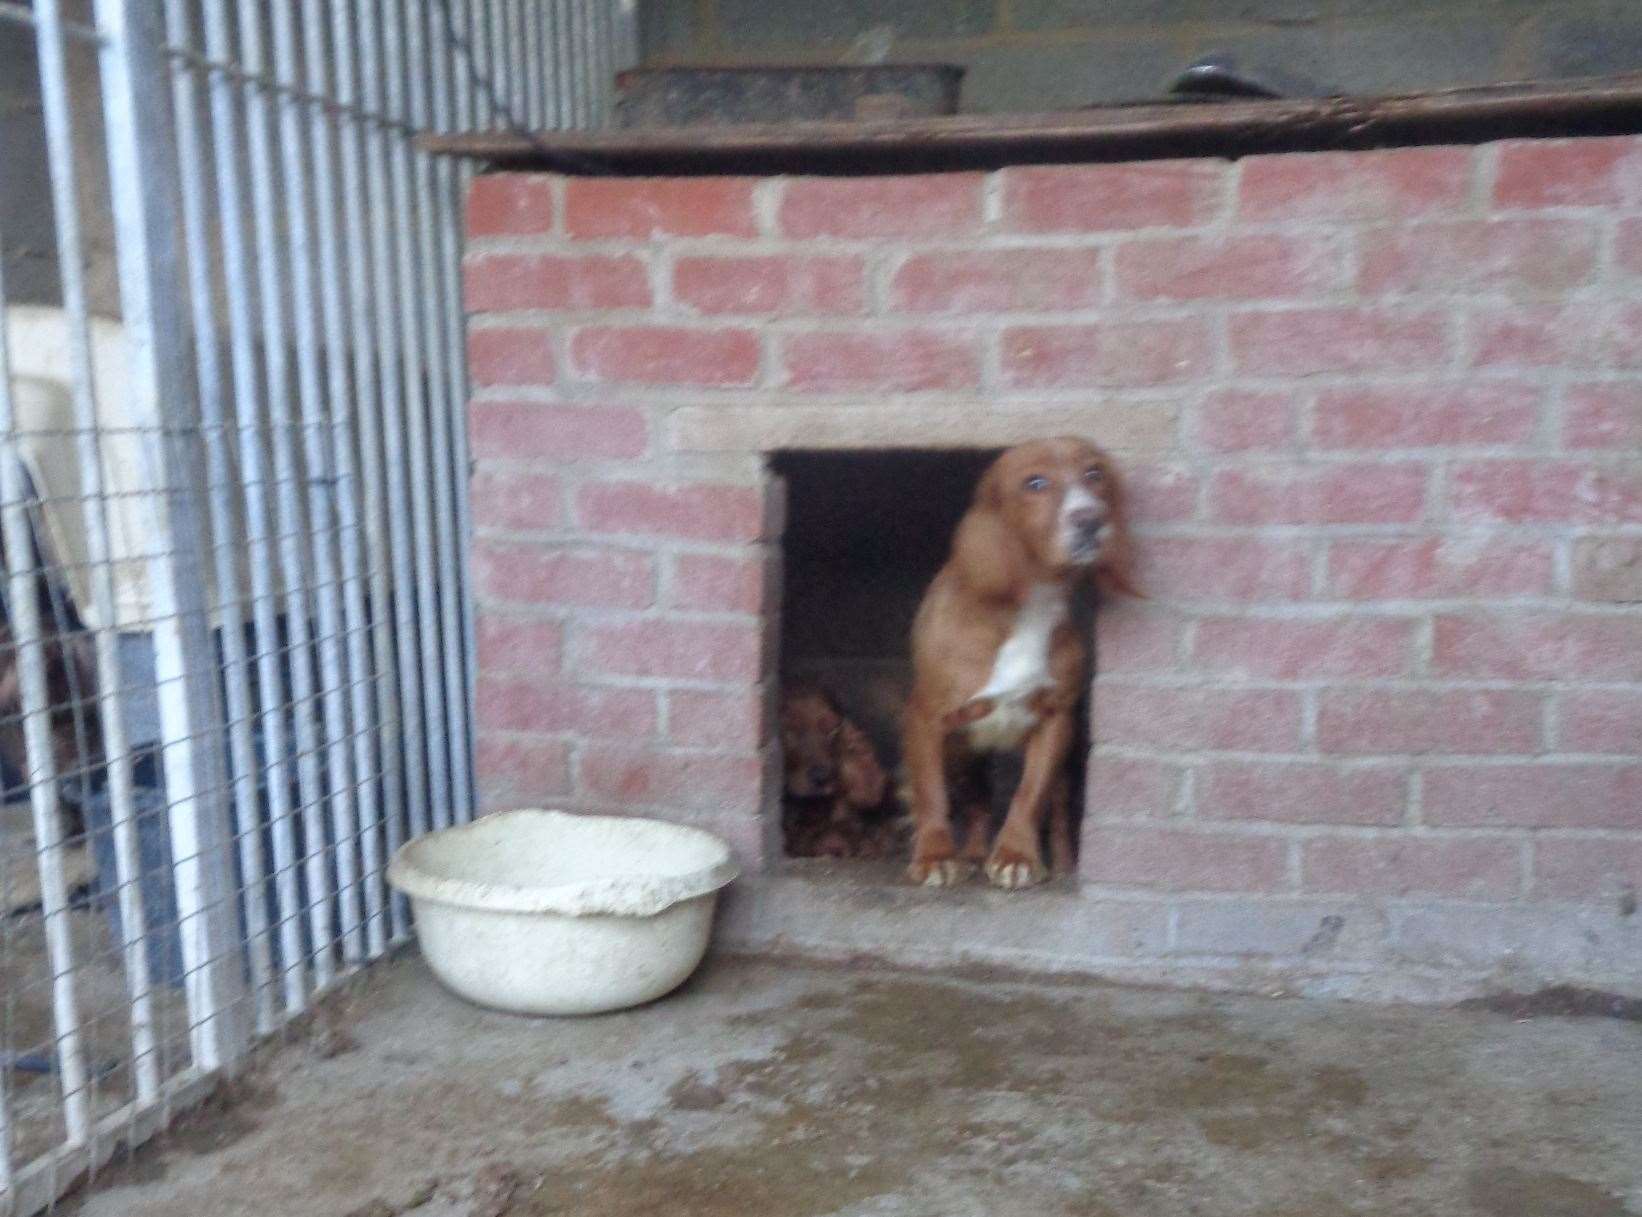 Eight dogs were found in "unacceptable conditions" after a warrant in Ditton. Picture: RSPCA